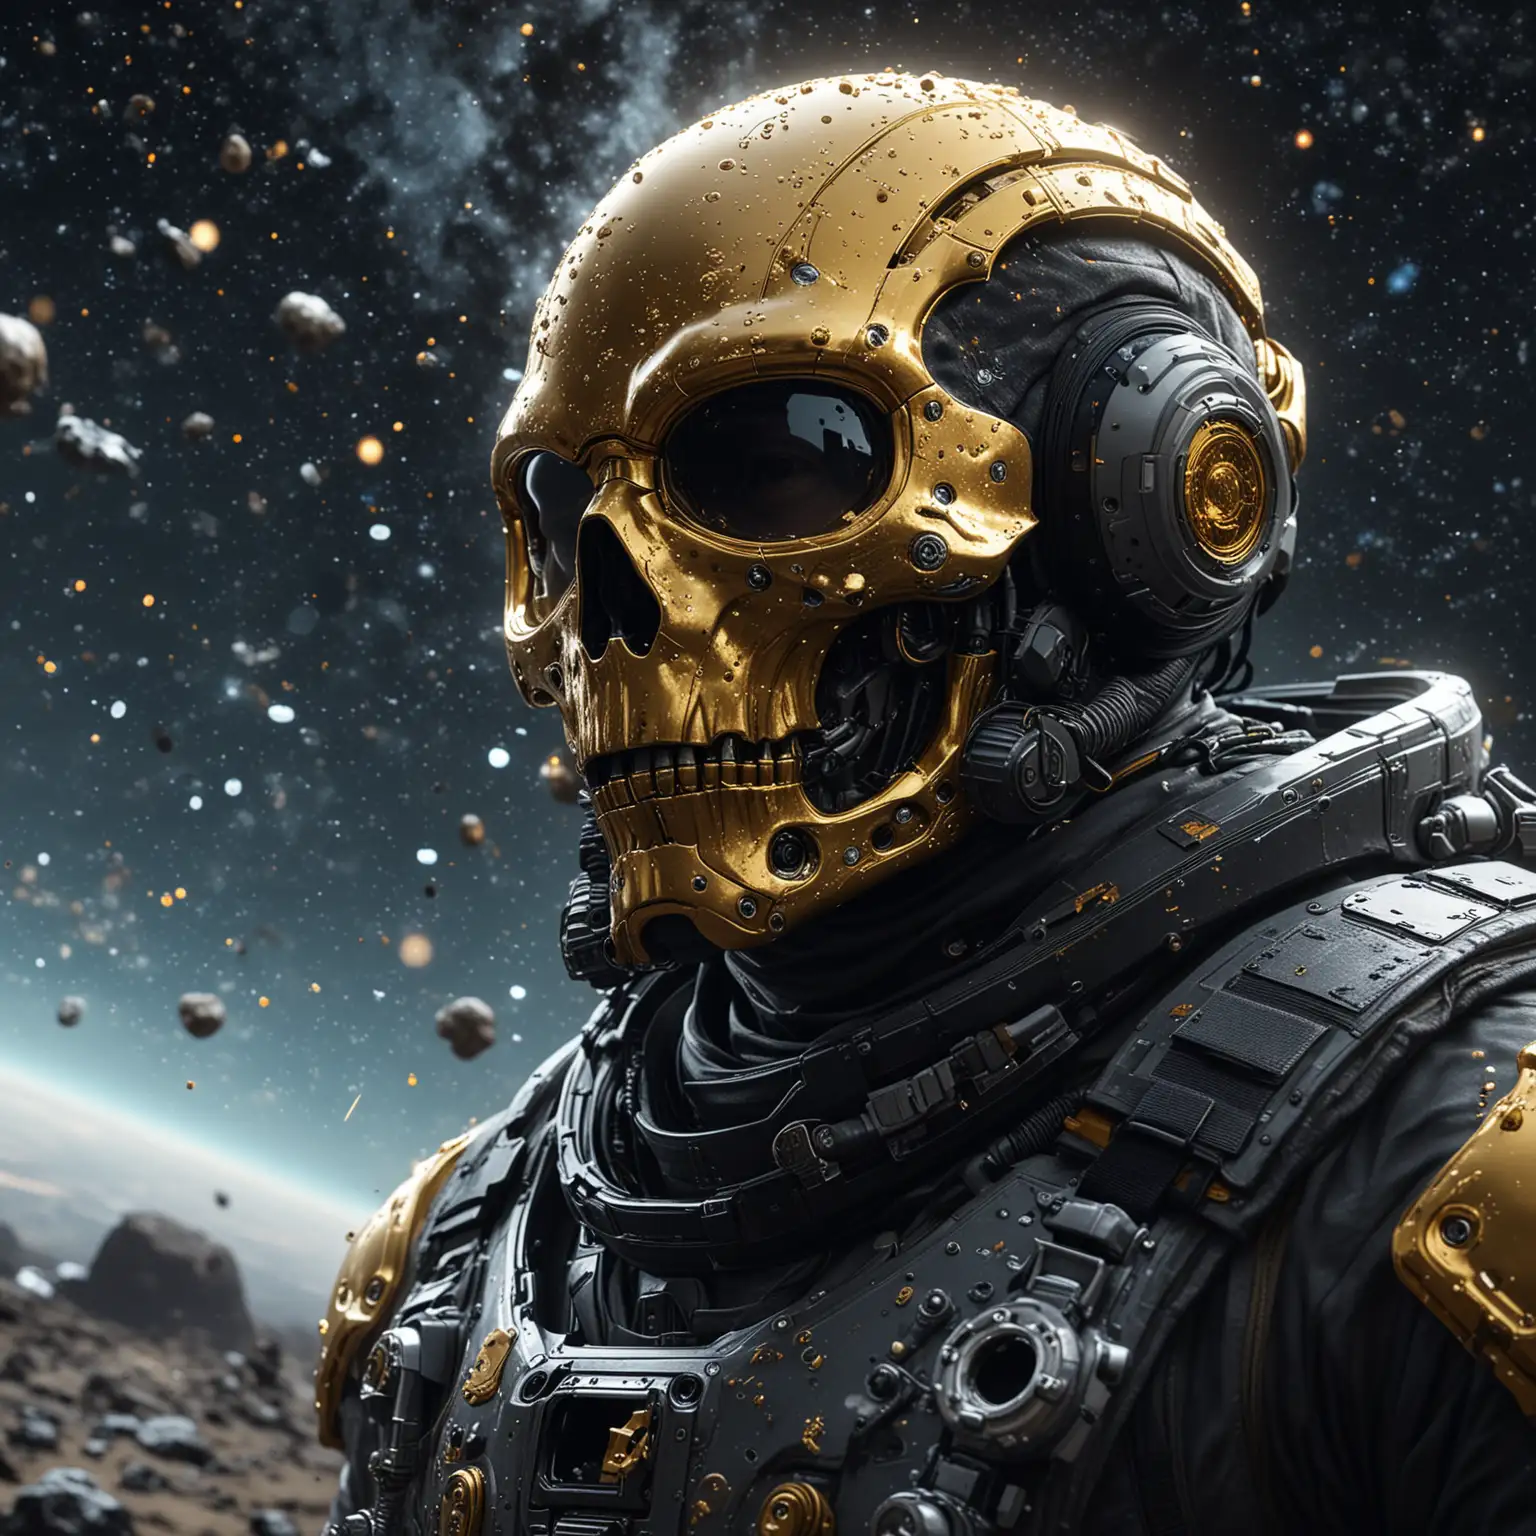 astronaut with a ludens death stranding space suit with a golden skull mask inside his helmet, floating in the void space through a galaxy of a million stars, the bubbles surrounding him contain fragments of knowledge and secrets of the universe,  reating an image that evokes amazement and admiration at the immensity of the cosmos, octane render, unreal engine 5, nvidia omniverse, realistic, photorealism, intricate, highly detailed, high definition, uhd, hdr, in the style of hidejo kojima. The shot is taken with an 18 mm wide-angle camera, nikon Z9 full-frame mirrorless camera photography, fisheye lens panoramic, chromatic aberration, film grain.